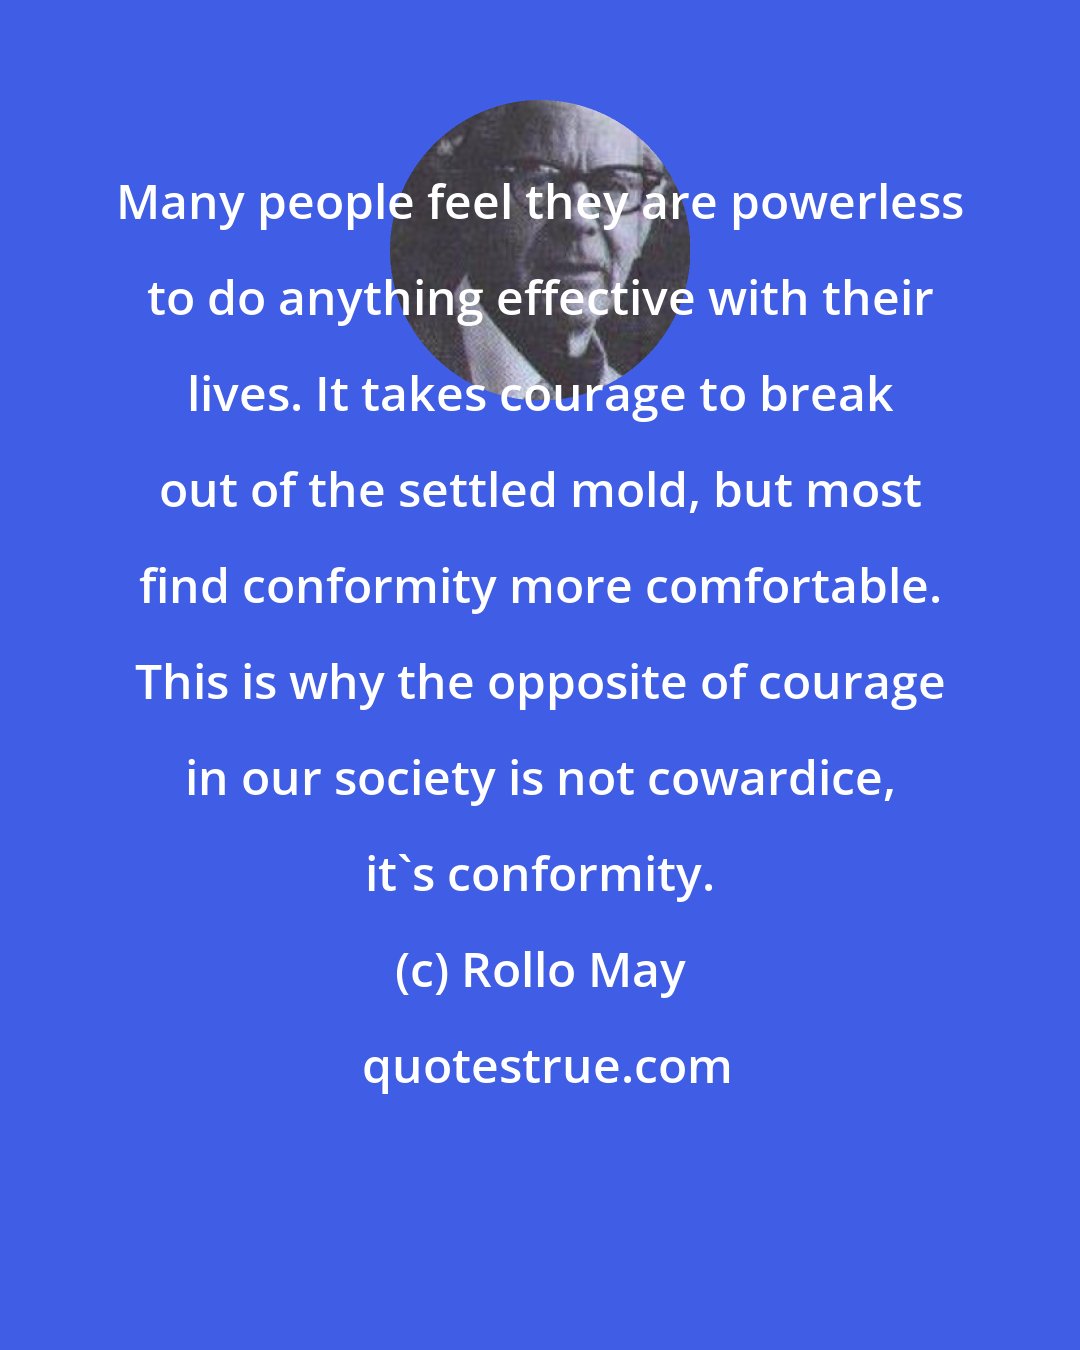 Rollo May: Many people feel they are powerless to do anything effective with their lives. It takes courage to break out of the settled mold, but most find conformity more comfortable. This is why the opposite of courage in our society is not cowardice, it's conformity.